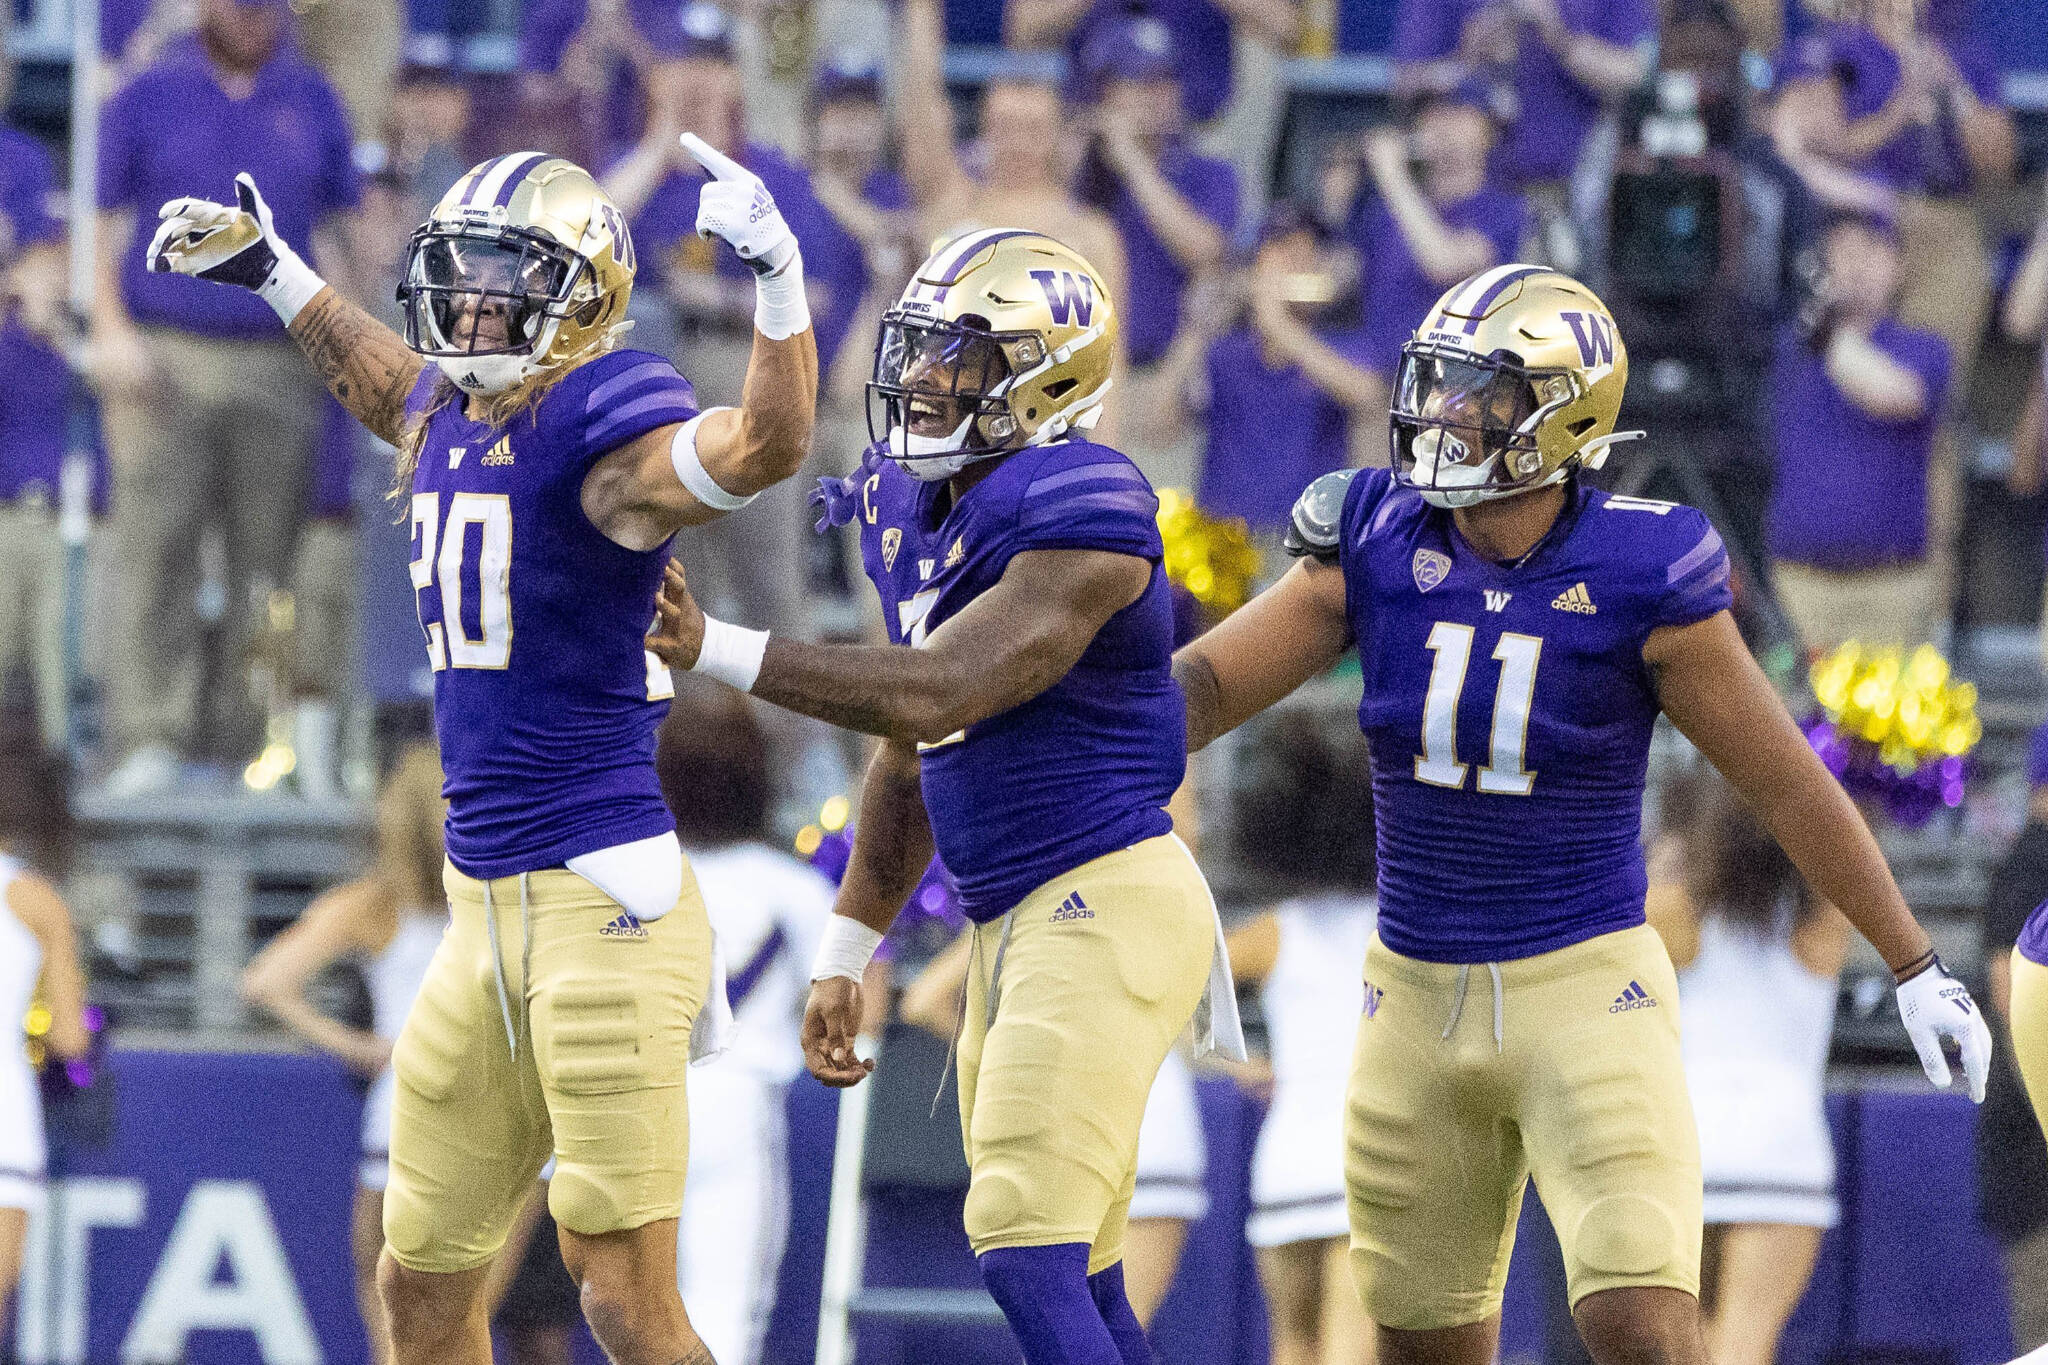 Washington’s Asa Turner (left) celebrates his interception with teammates during the first half of a game against Kent State on Sept. 3 in Seattle. (Dean Rutz/The Seattle Times via AP)